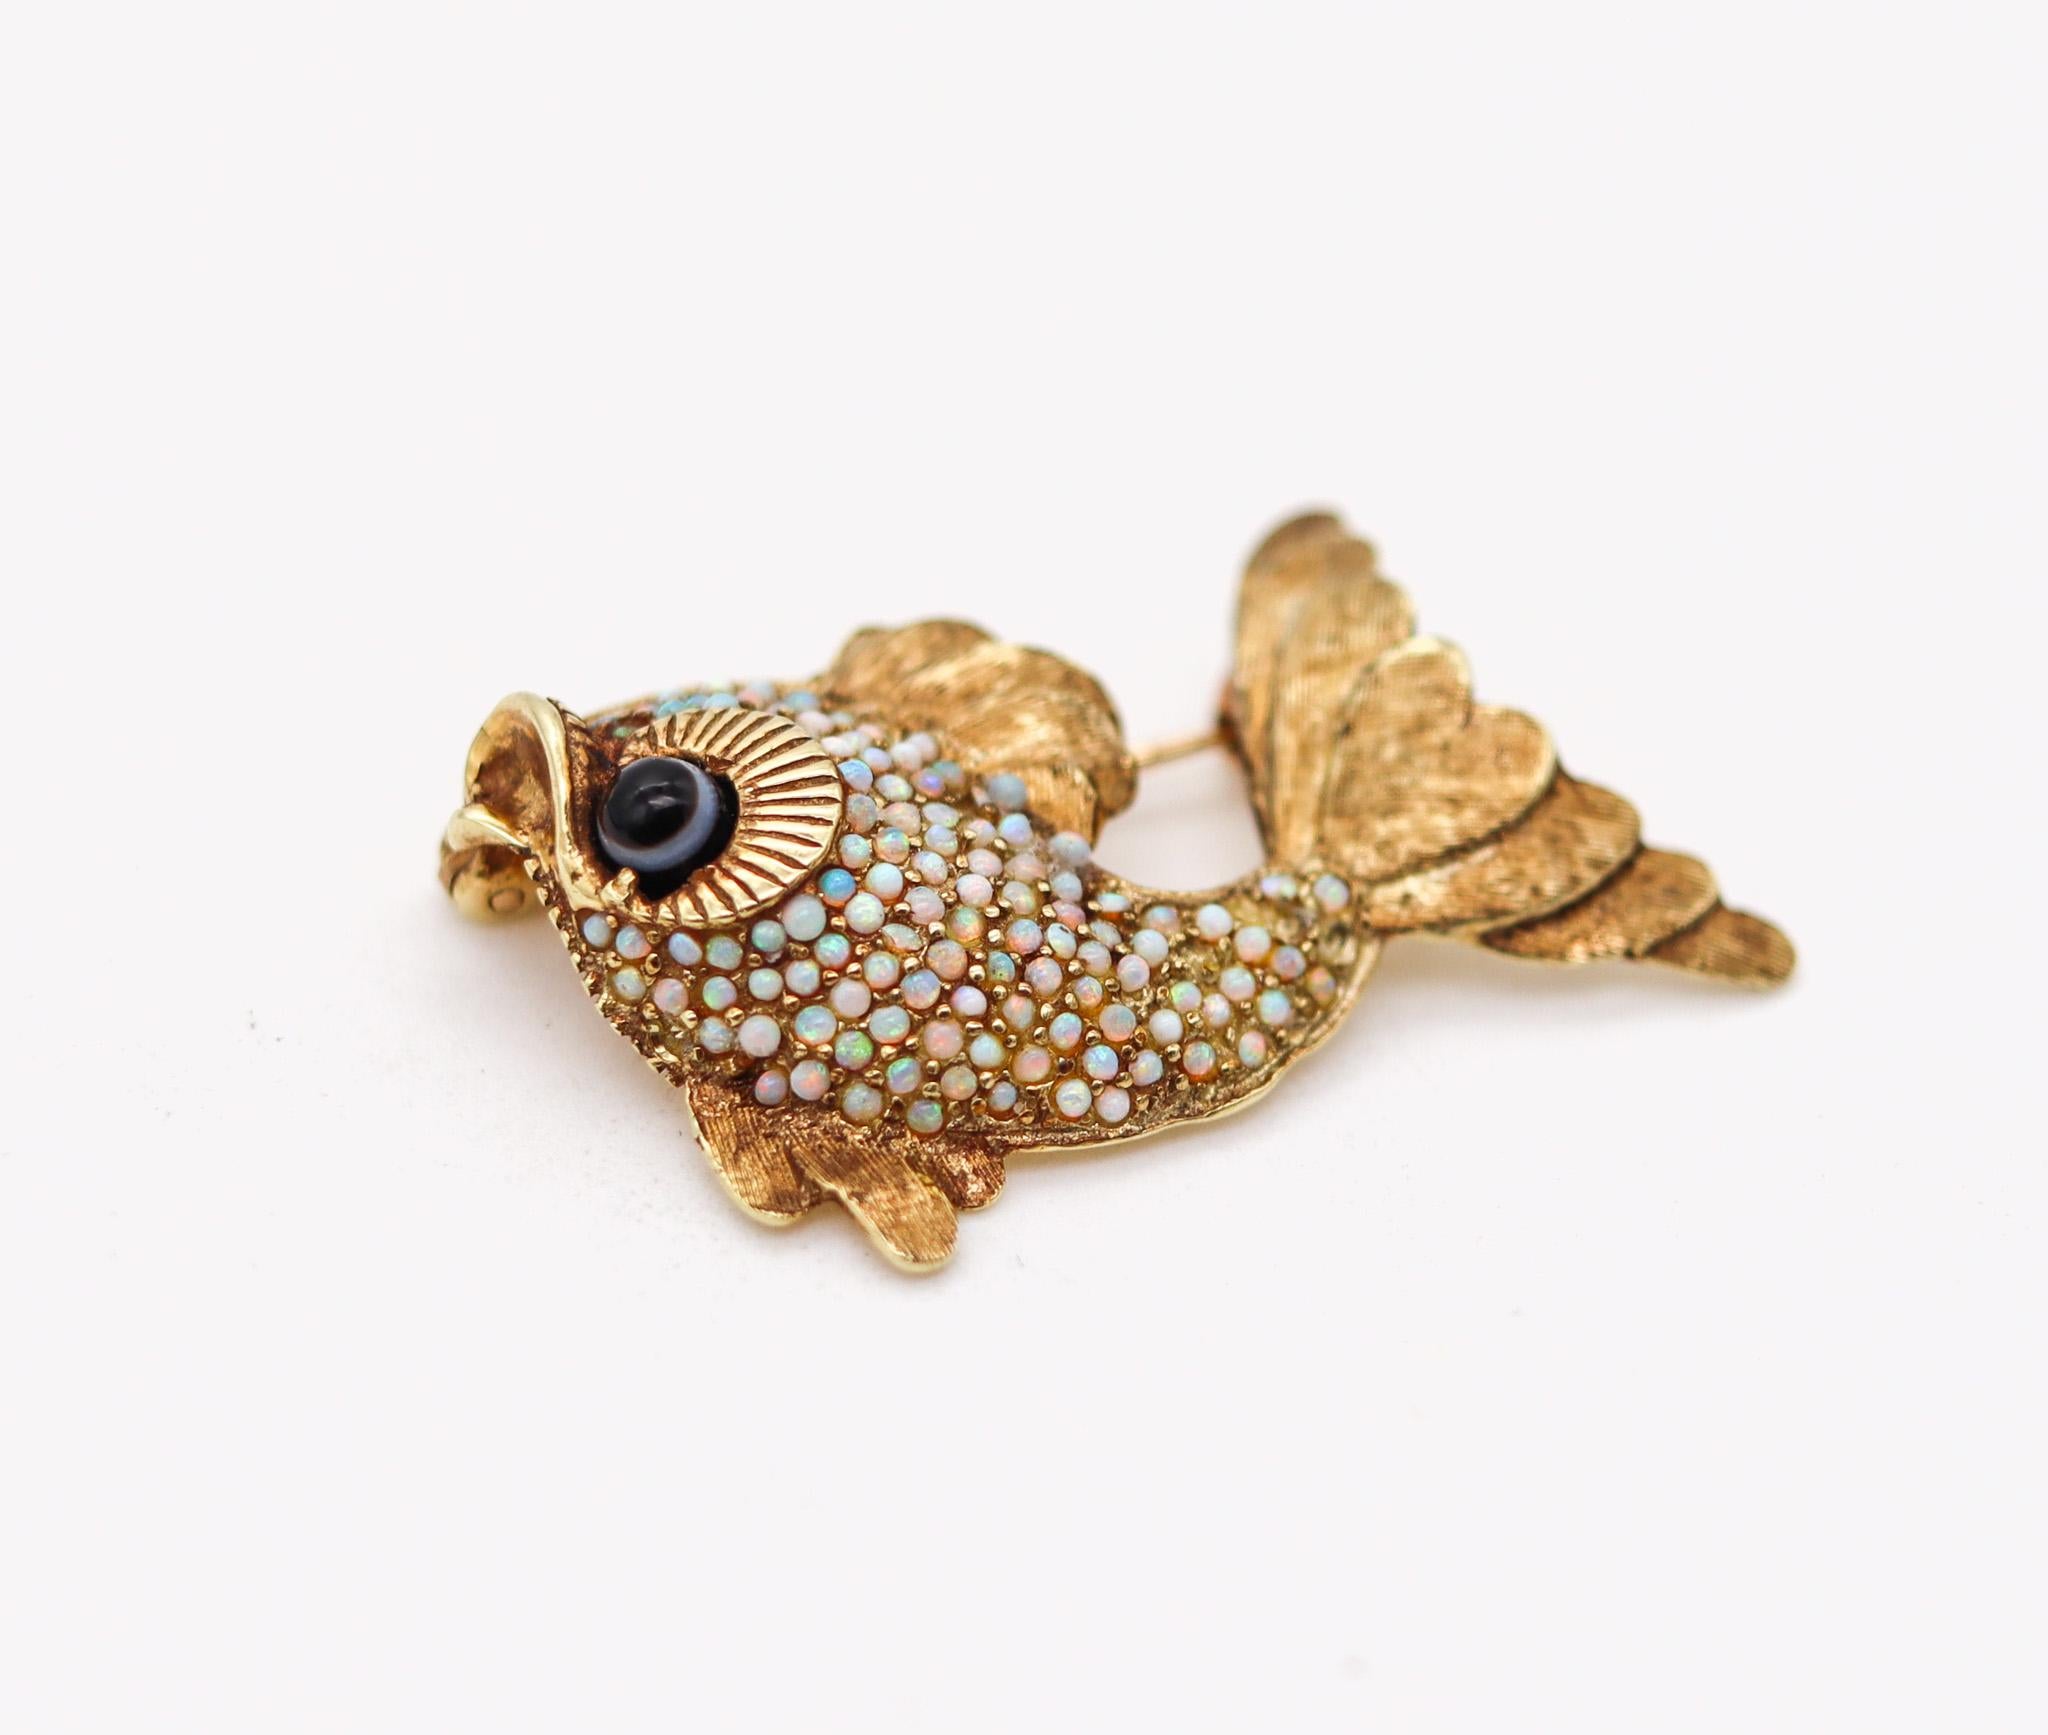 Modernist fish brooch with Australian Opals.

Magnificent fish brooch, created in Italy back in the 1960. This little fish has been crafted with fabulous intricate details in solid yellow gold of 18 karats. Fitted with a hinged bar with a mechanical